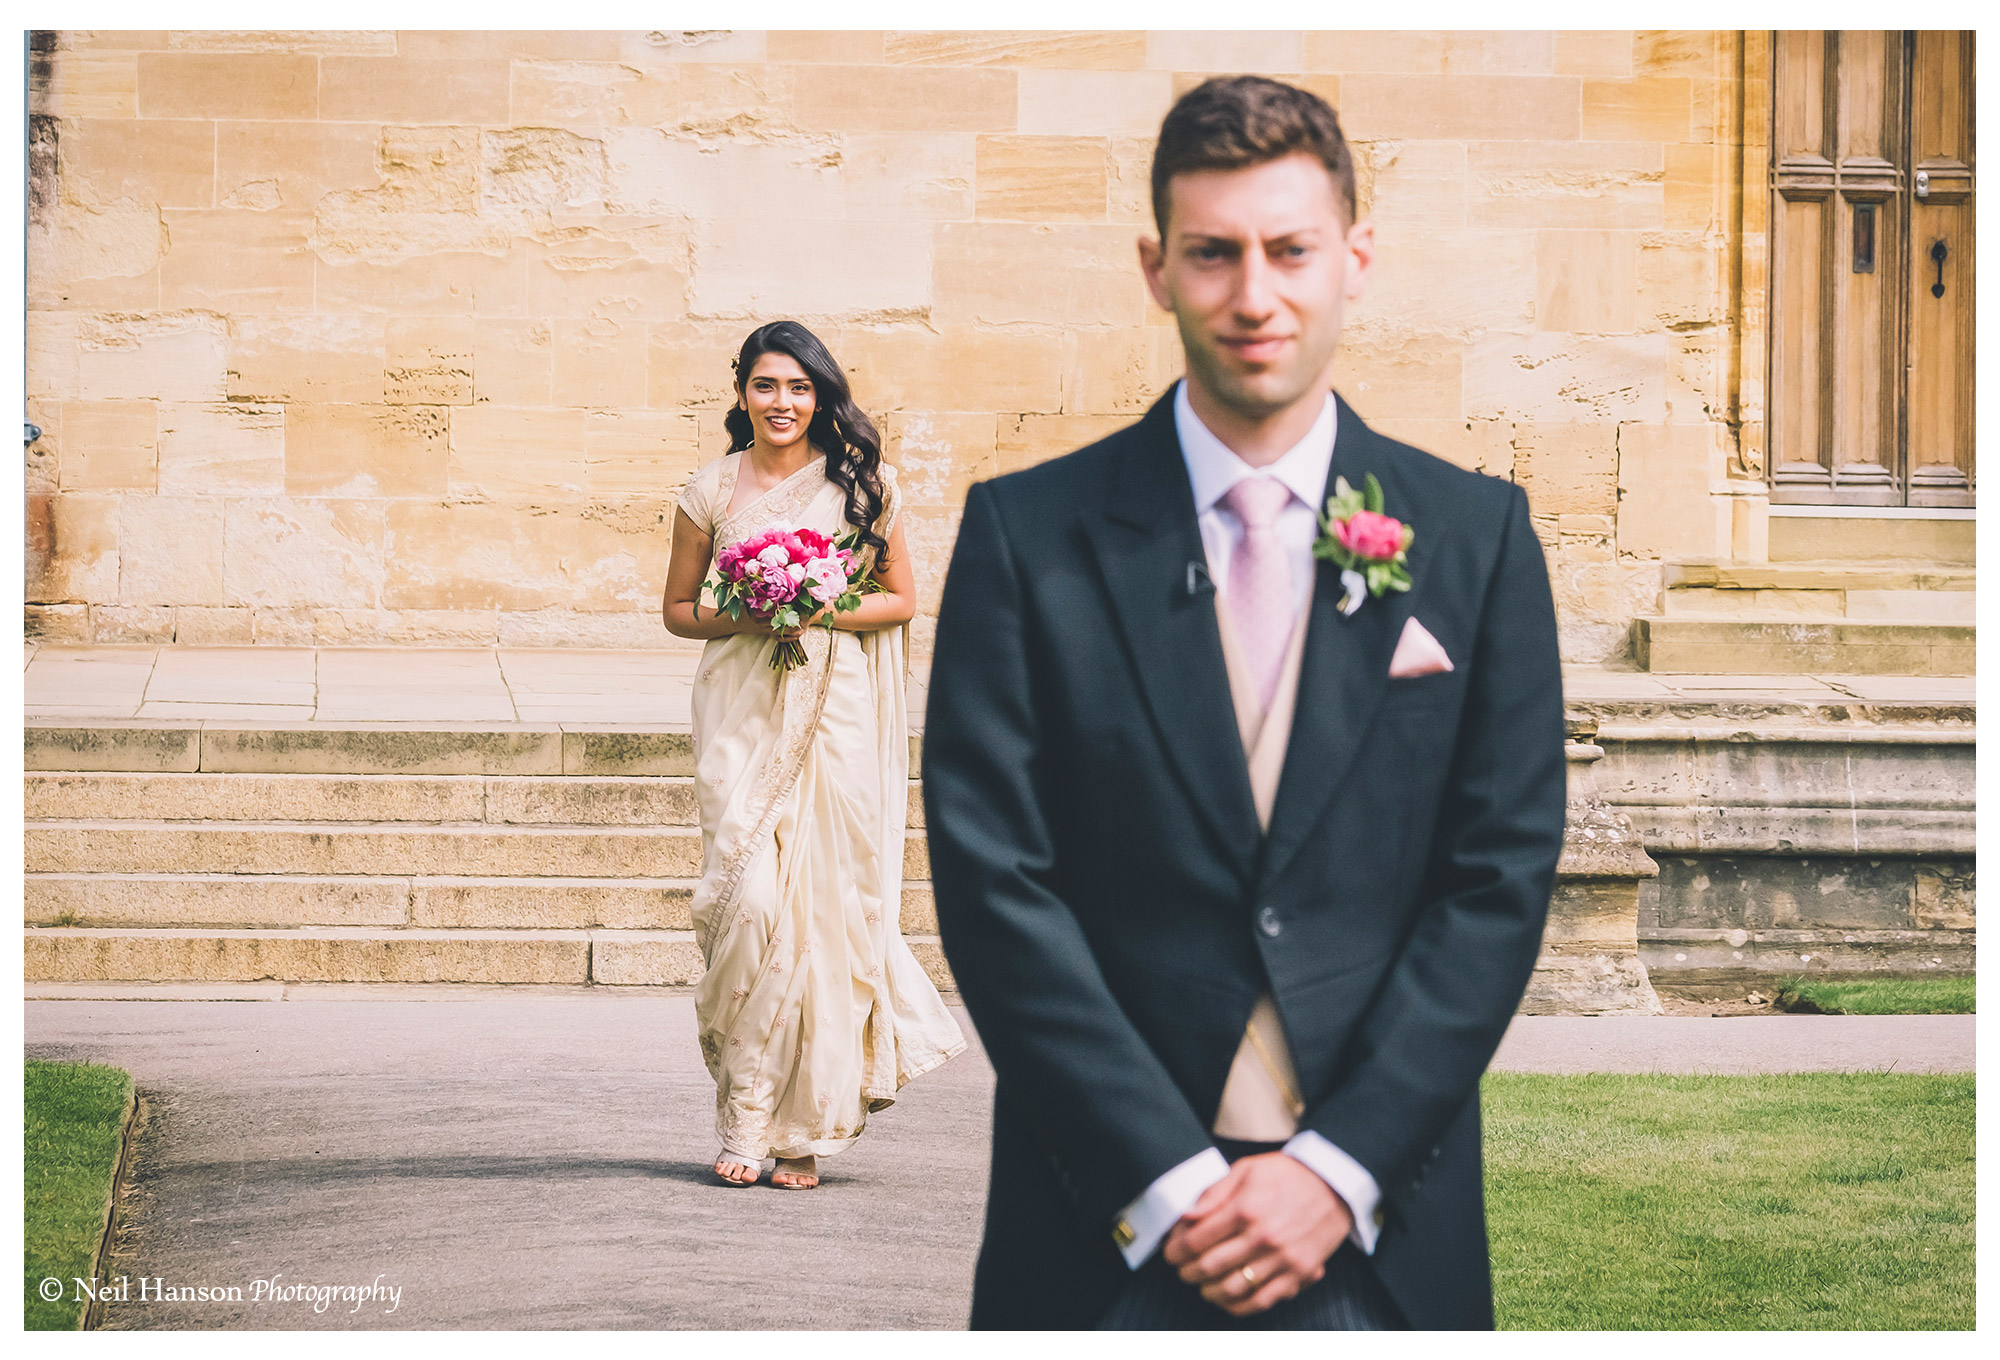 Bride & Groom first look at Christ Church cathedral in Oxford